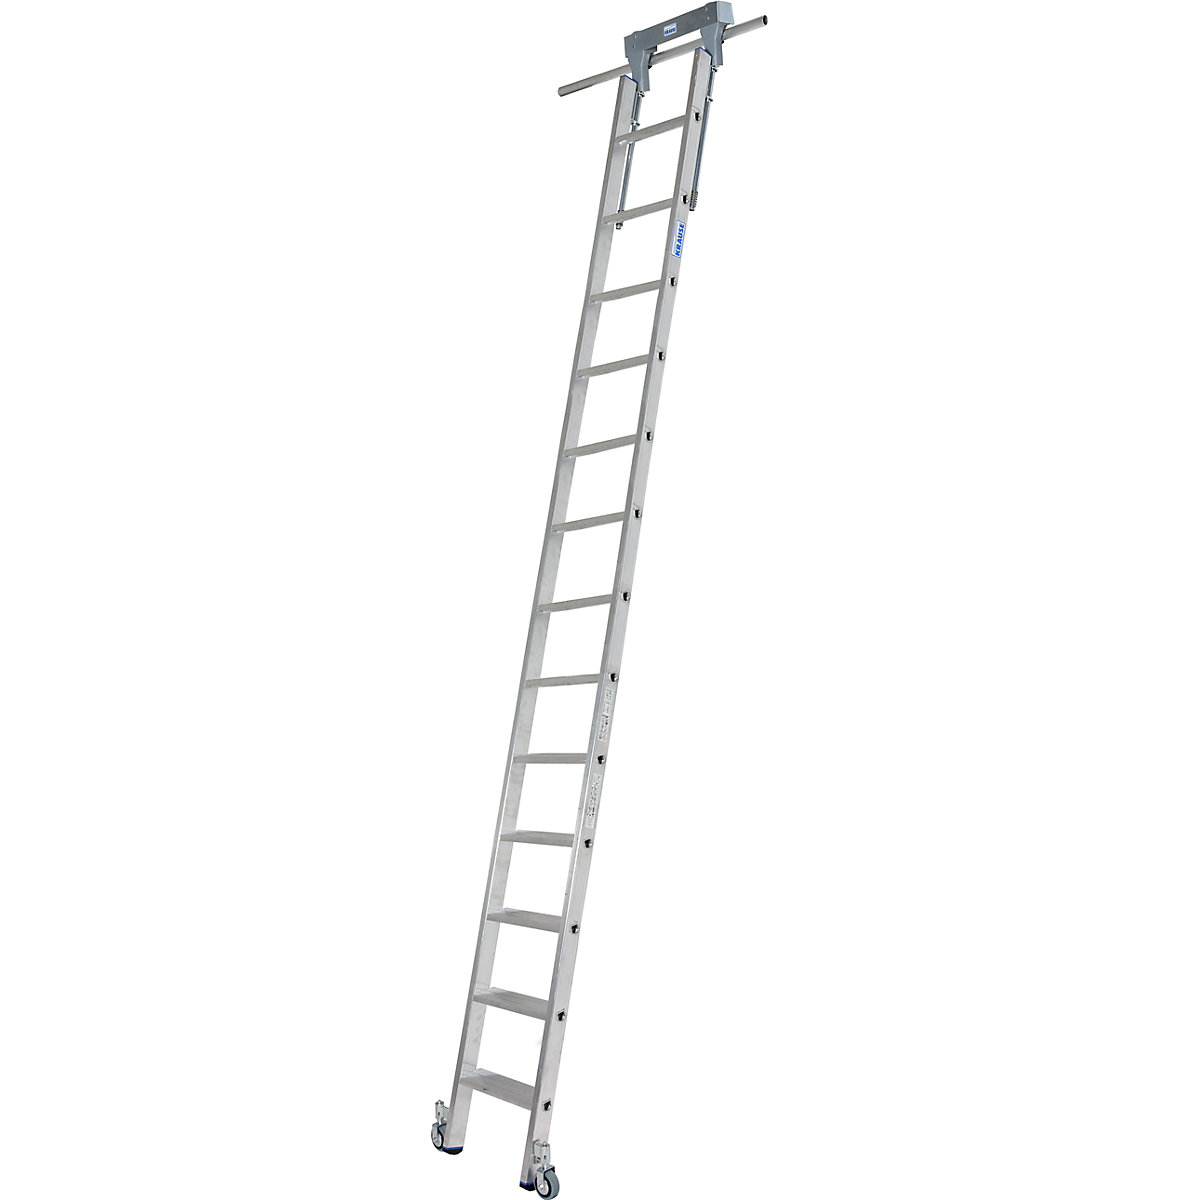 KRAUSE – Step shelf ladder, with wheels on top for round tubing rail system, 13 steps